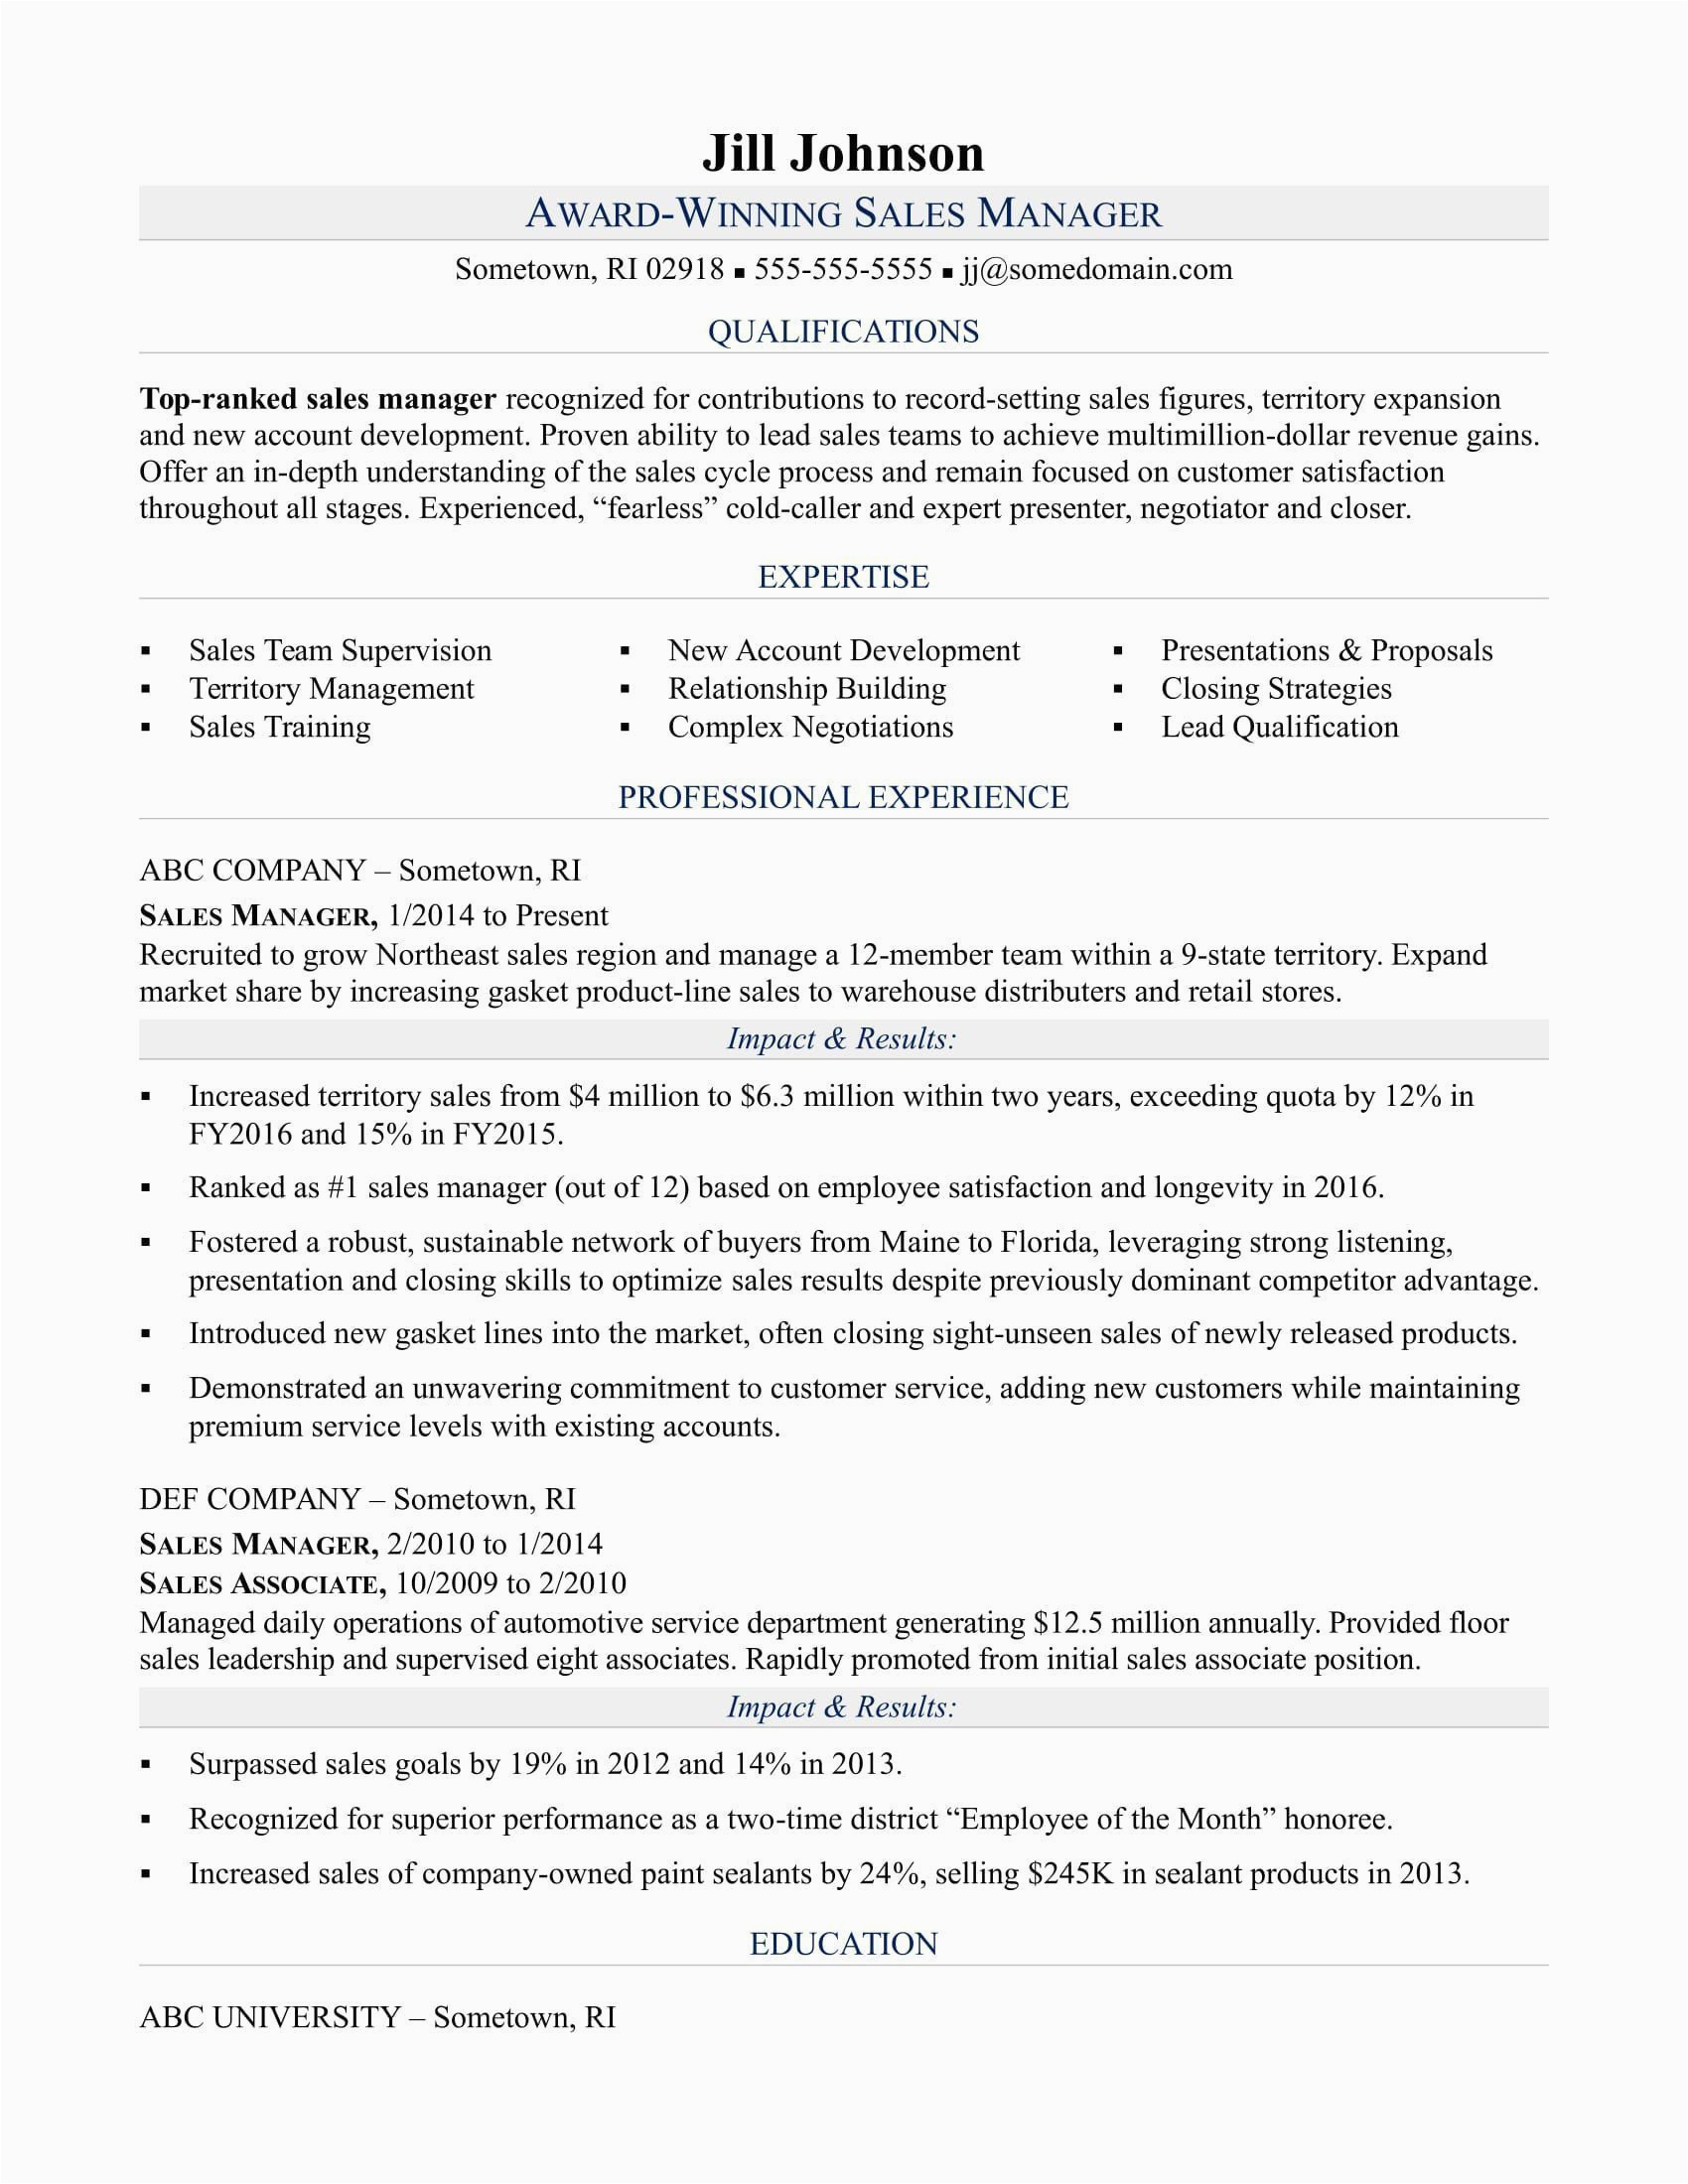 Sample Resume for Sales and Distribution Professional Summary Sales and Marketing Resume format Resume